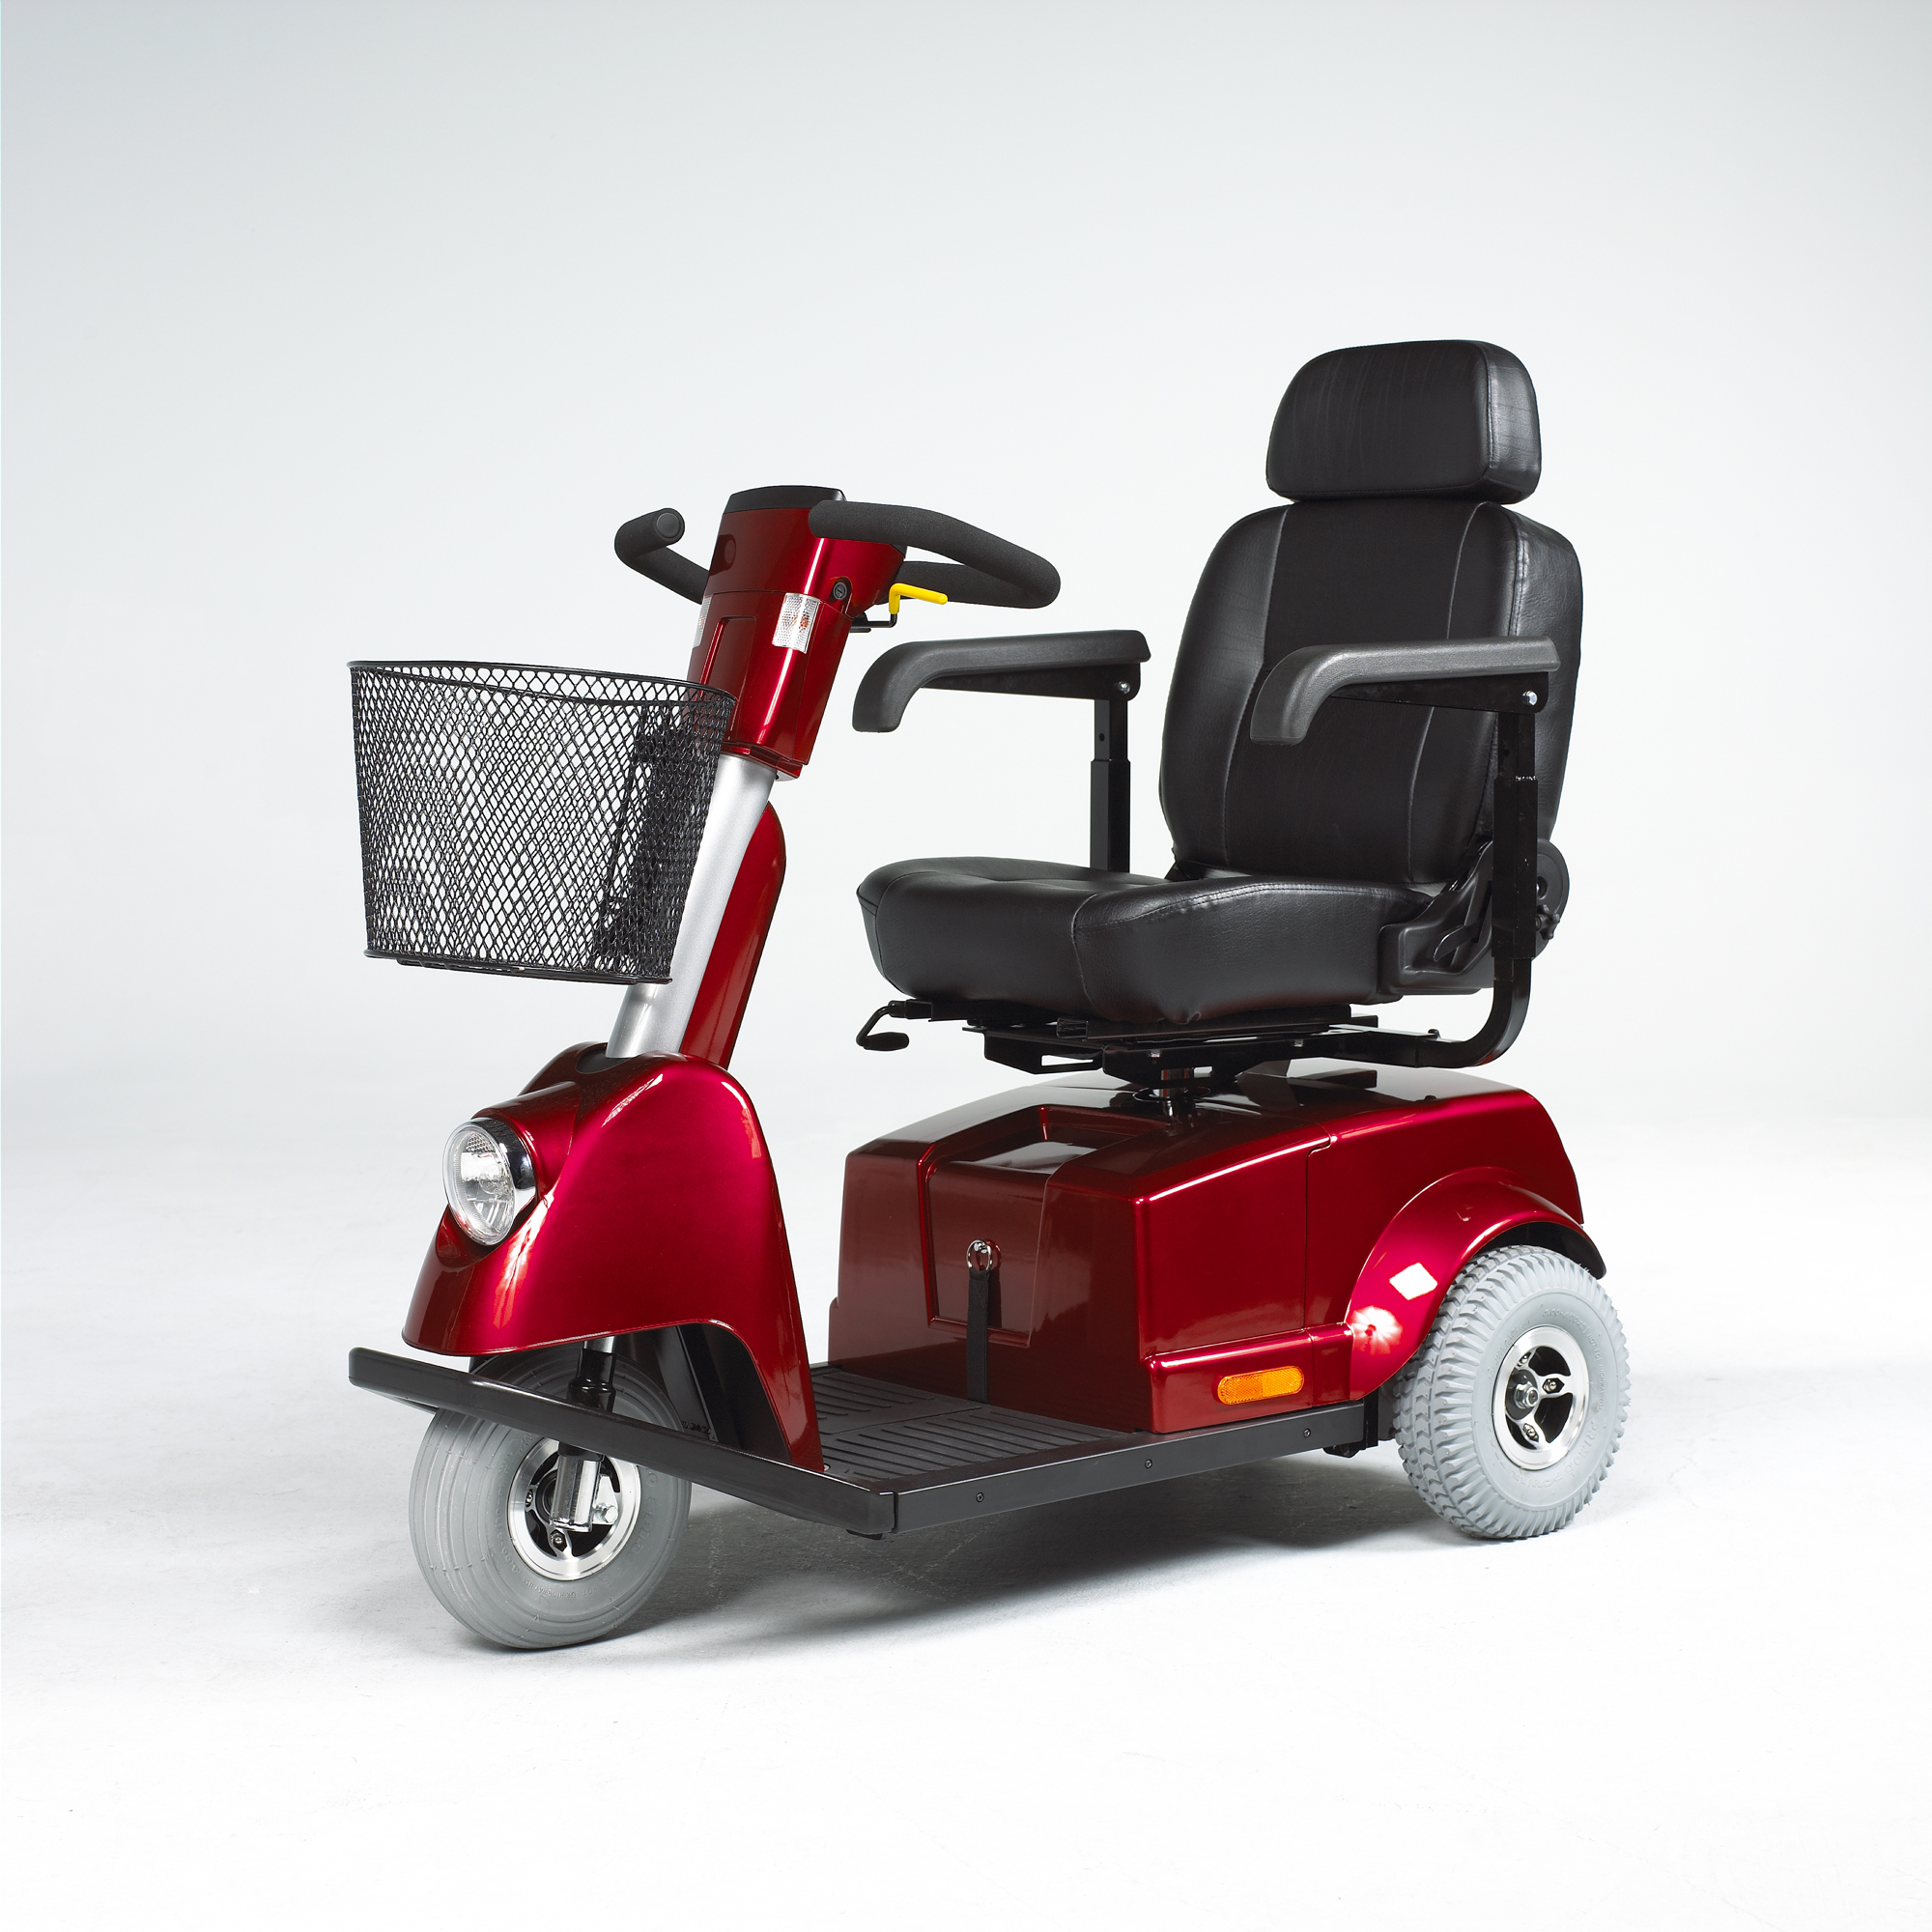 Fortress 1700 3-wheel scooter, red